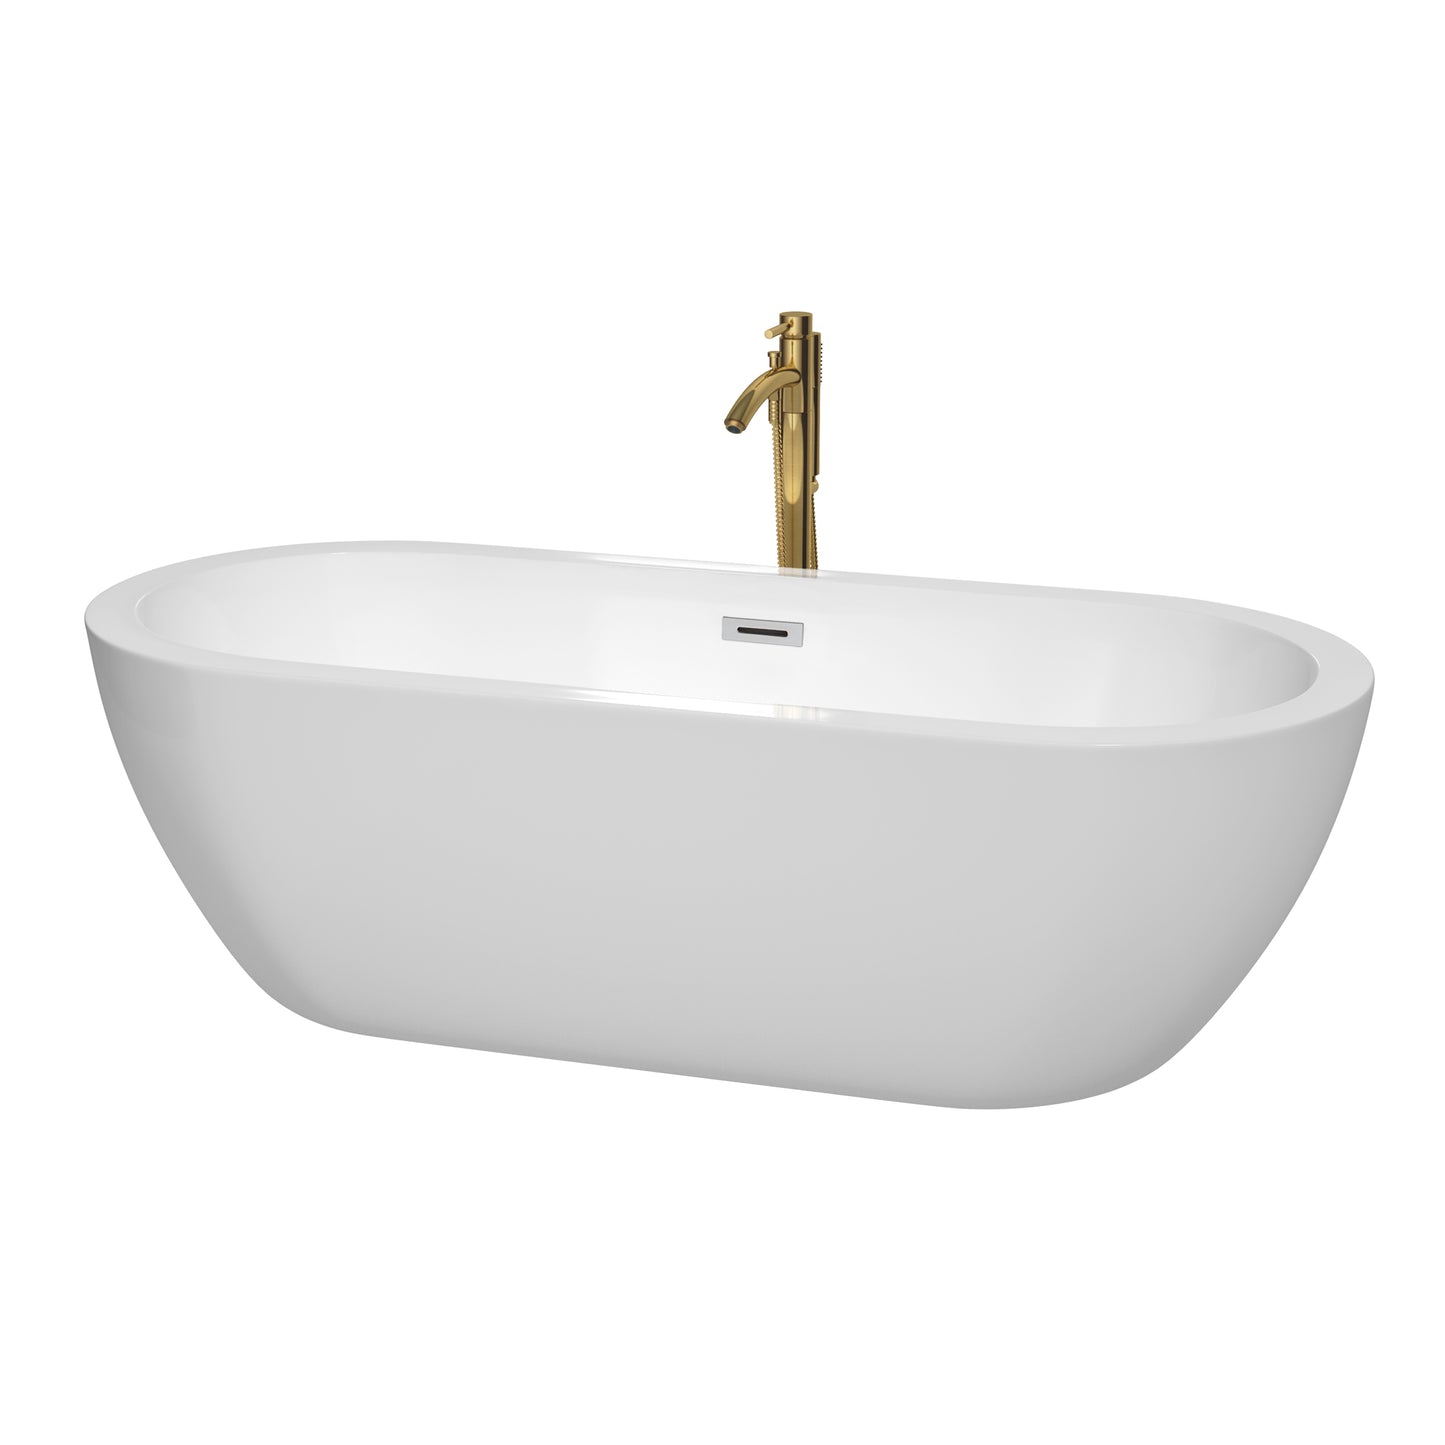 Wyndham Collection Soho 72 Inch Freestanding Bathtub in White with Floor Mounted Faucet, Drain and Overflow Trim - Luxe Bathroom Vanities